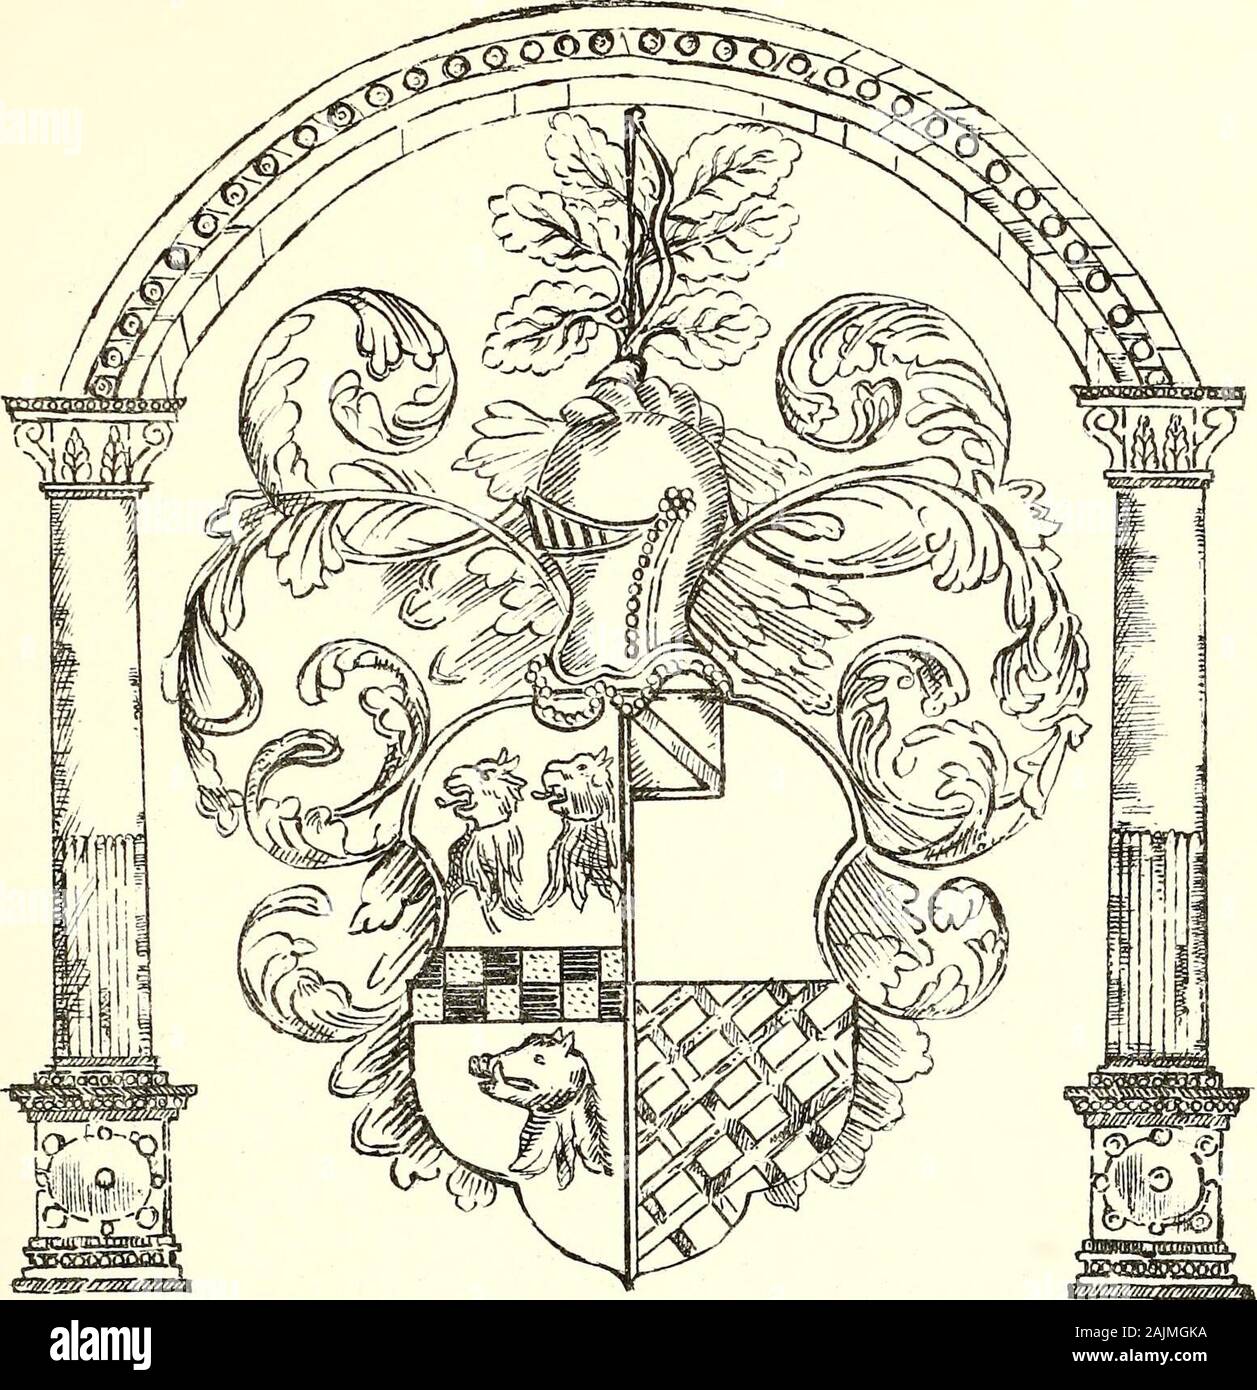 The Birkbecks of Westmorland and their descendants . roperty to his brothers. His widow died 16 September, 1616. REV. CUTHBERT BYRKBECK, younger son of Edward (r/Wep. 17), is mentioned as Syr Hylbert Byrbeck, Vickar off Lamffae, 1608,in the following pedigree in Dwnns Visitations of Wales and part of theMarches between a.i). 1586 and 1613 (vol. i., p. 191). Tomas Byrbeck Esq=p. . iEdward Byrbeck Esq.=pjan koeyr to Tomas Lonkaster. Tomas=pJowan Byrbeck II III I I I Syr Hylbert 4. Edward, i. Elsbeth. 2. Barbra 3. Elnor do. to Byrbeck Vickar — mared to mared mared Ambros off Lamffae 5. Ricliard E Stock Photo